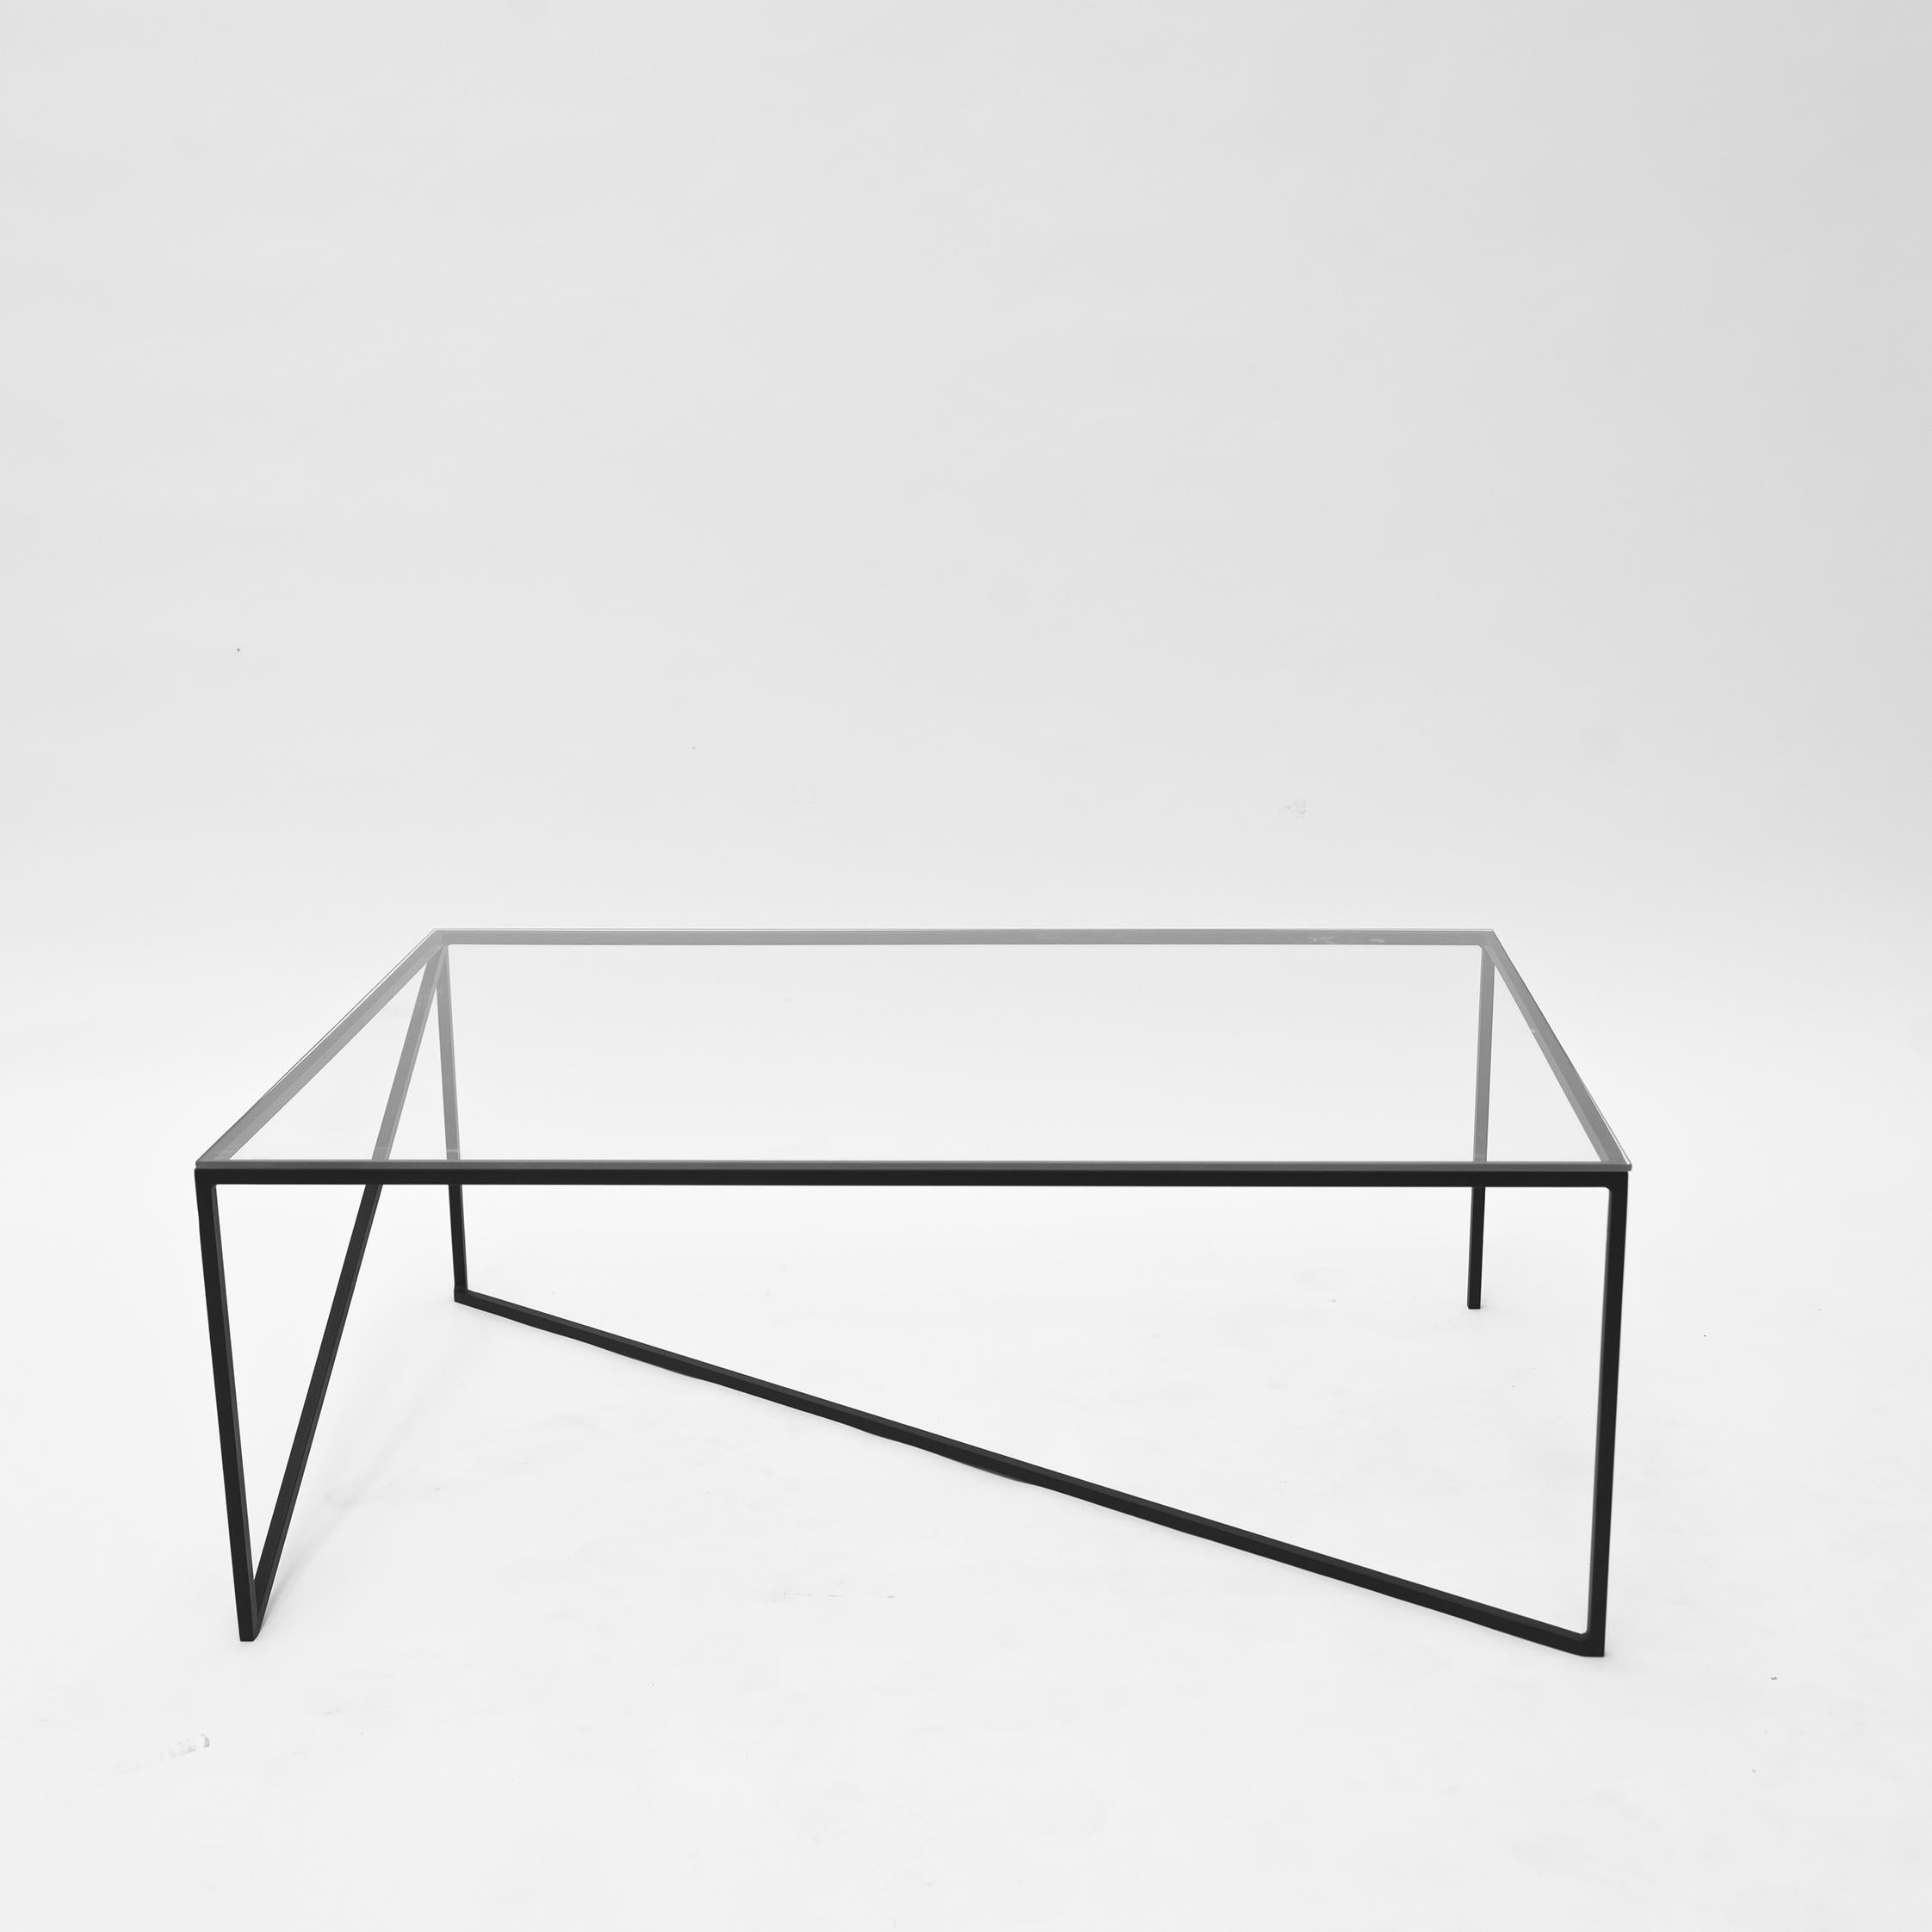 Object 038 coffee table by NG Design
Dimensions: D90 x W54 x H34 cm
Materials: Powder coated steel,Tempered Glass

Also Available: All of objects available in different materials and colors on demand.

A variation on one of our bestsellers,